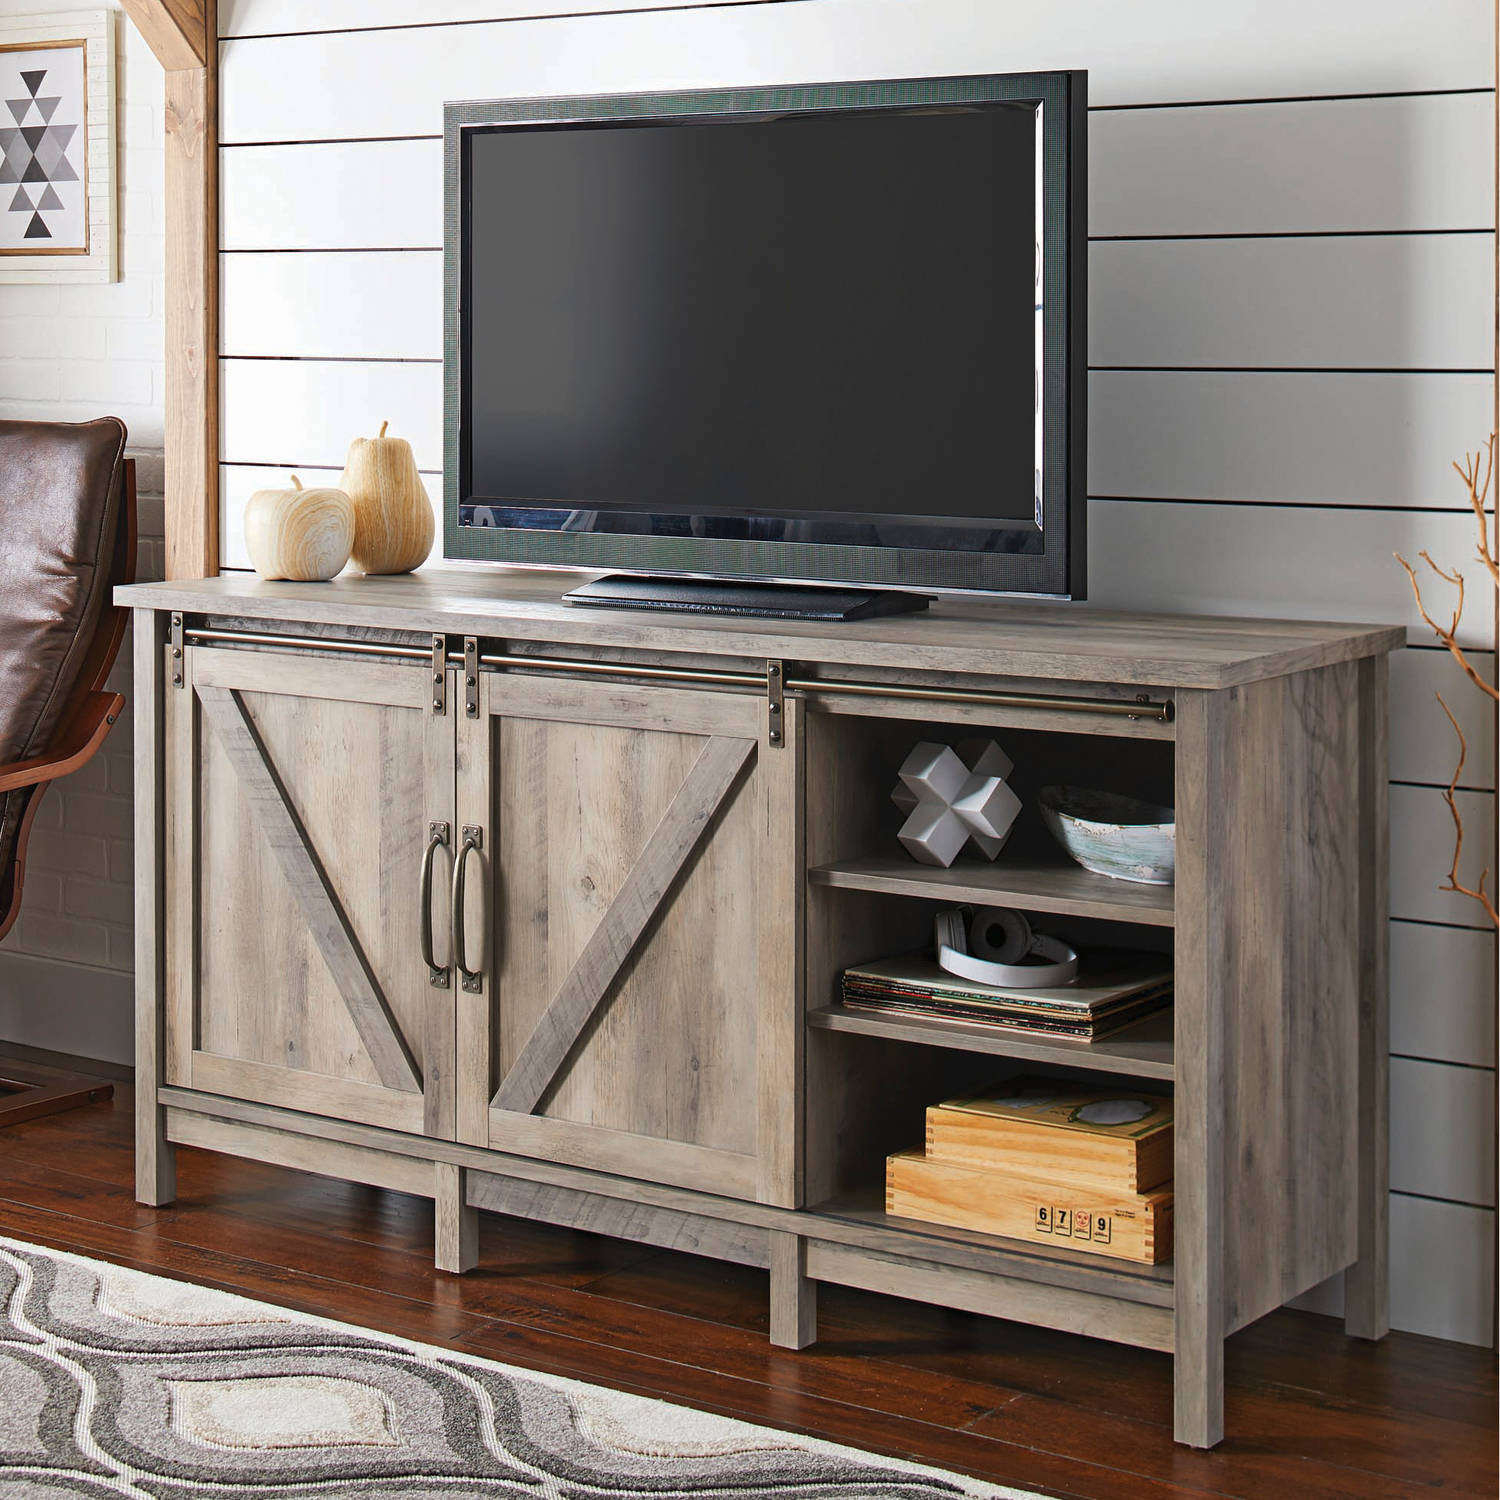 Better Homes & Gardens Modern Farmhouse TV Stand for TVs up to 70", Rustic Gray - image 4 of 14